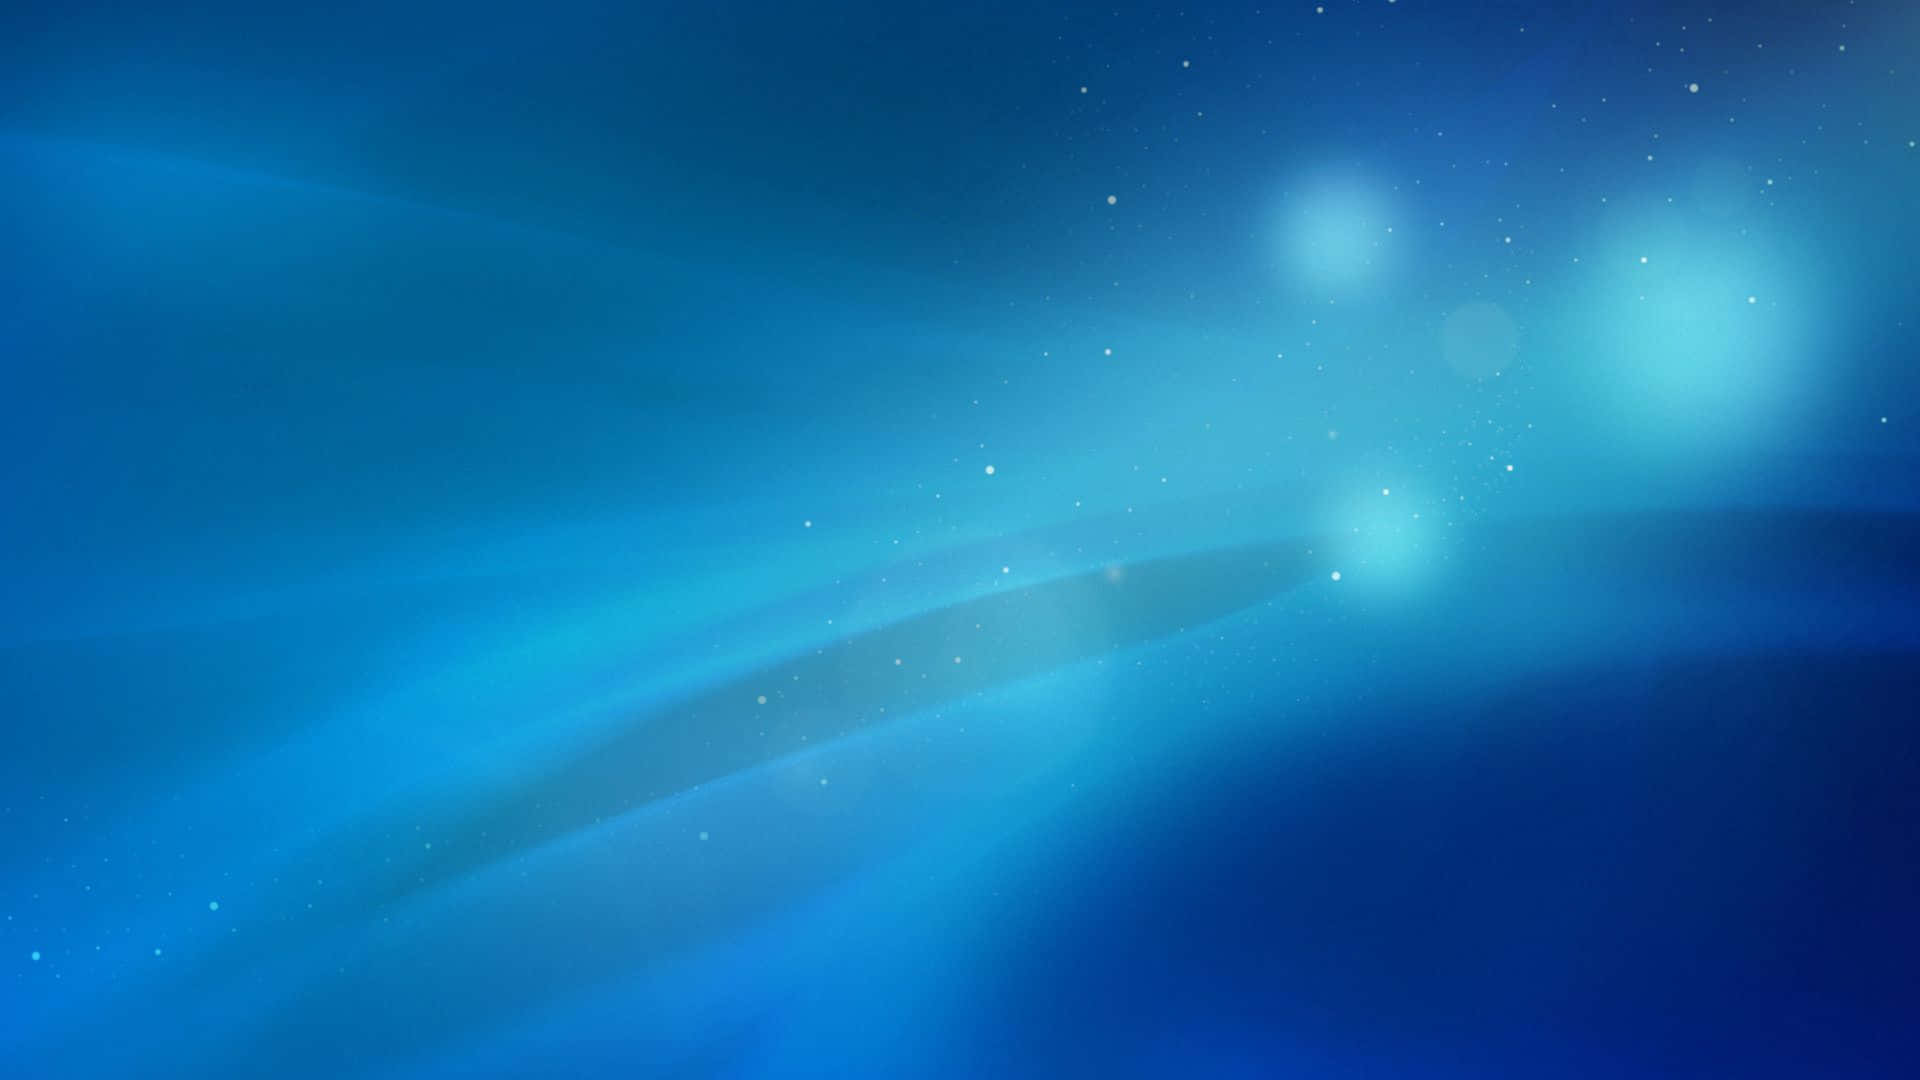 Sparkles And Circles Glowing Blue PC Wallpaper